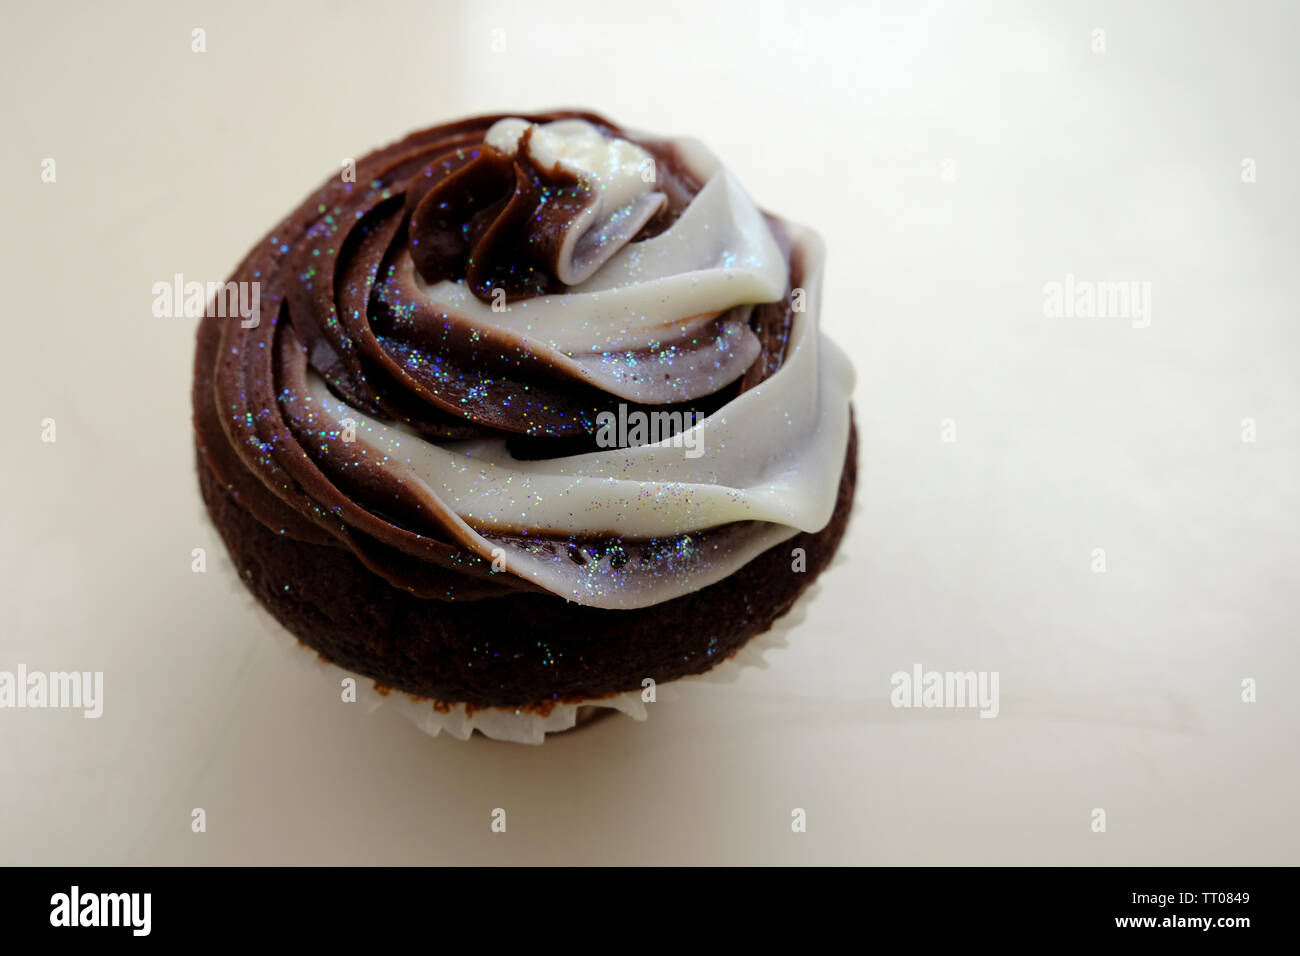 Chocolate cupcake with vanilla and chocolate butter icing and topped with edible glitter Stock Photo